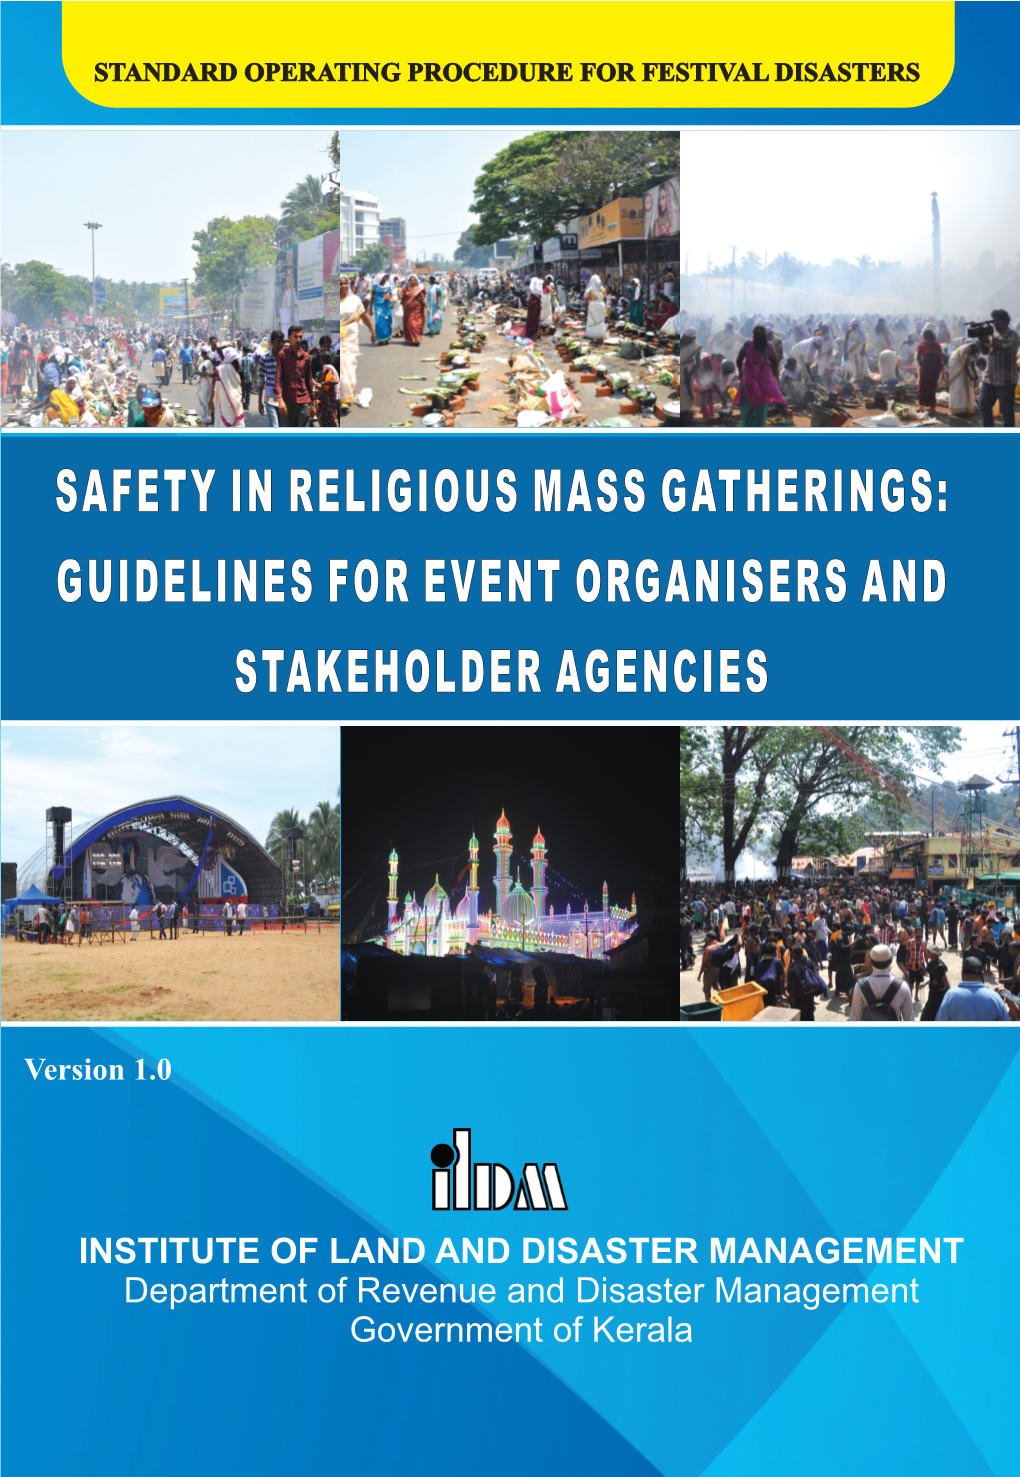 Safety in Religious Mass Gatherings: Guidelines for Event Organisers and Stakeholder Agencies